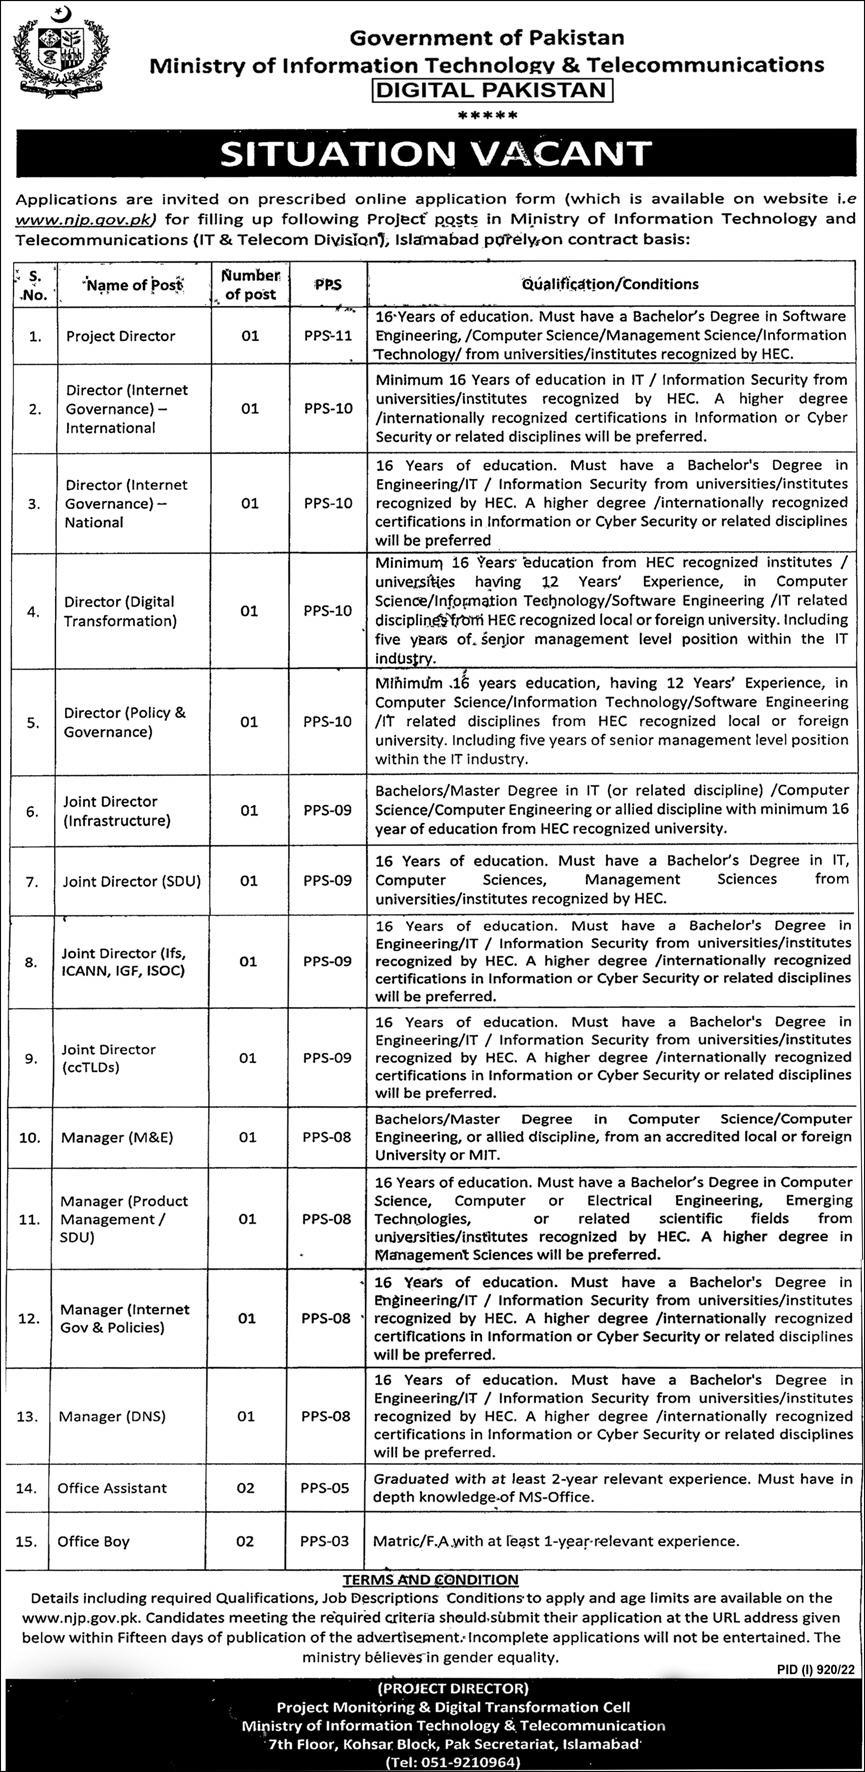 Ministry of Information Technology & Telecommunications Jobs 2022